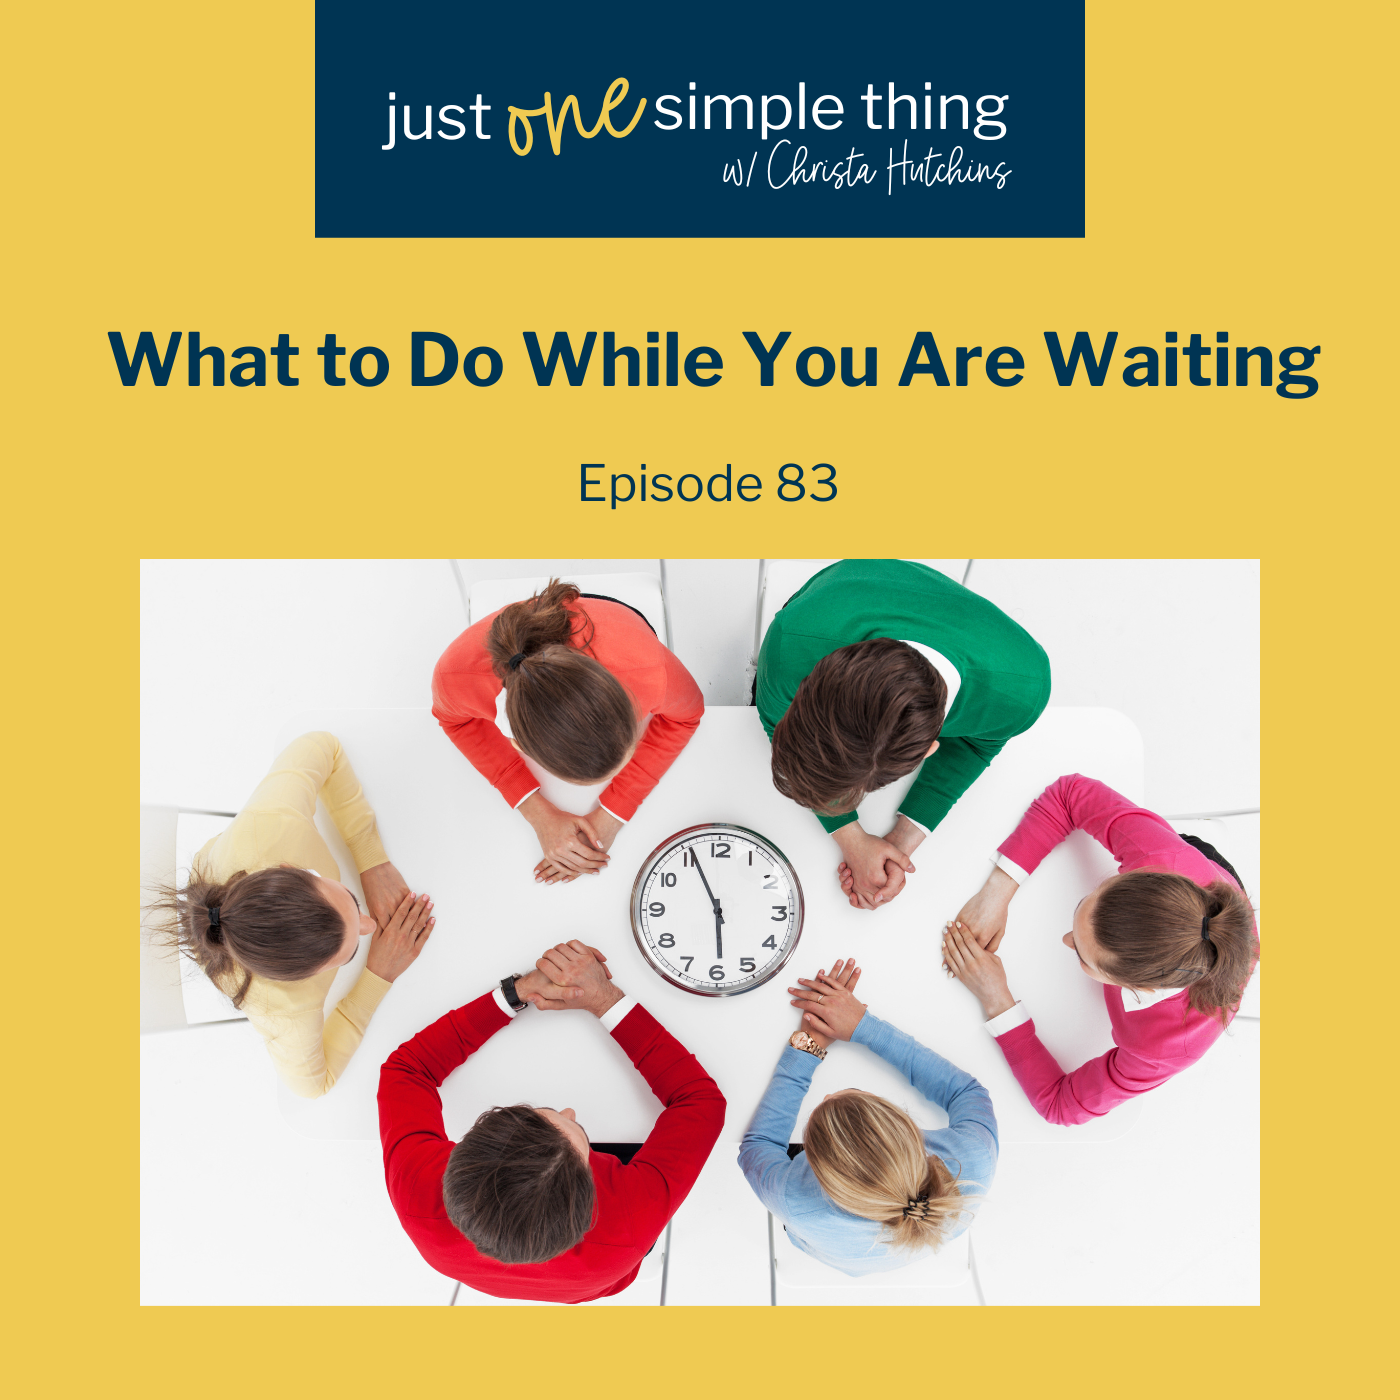 What to Do While You Are Waiting